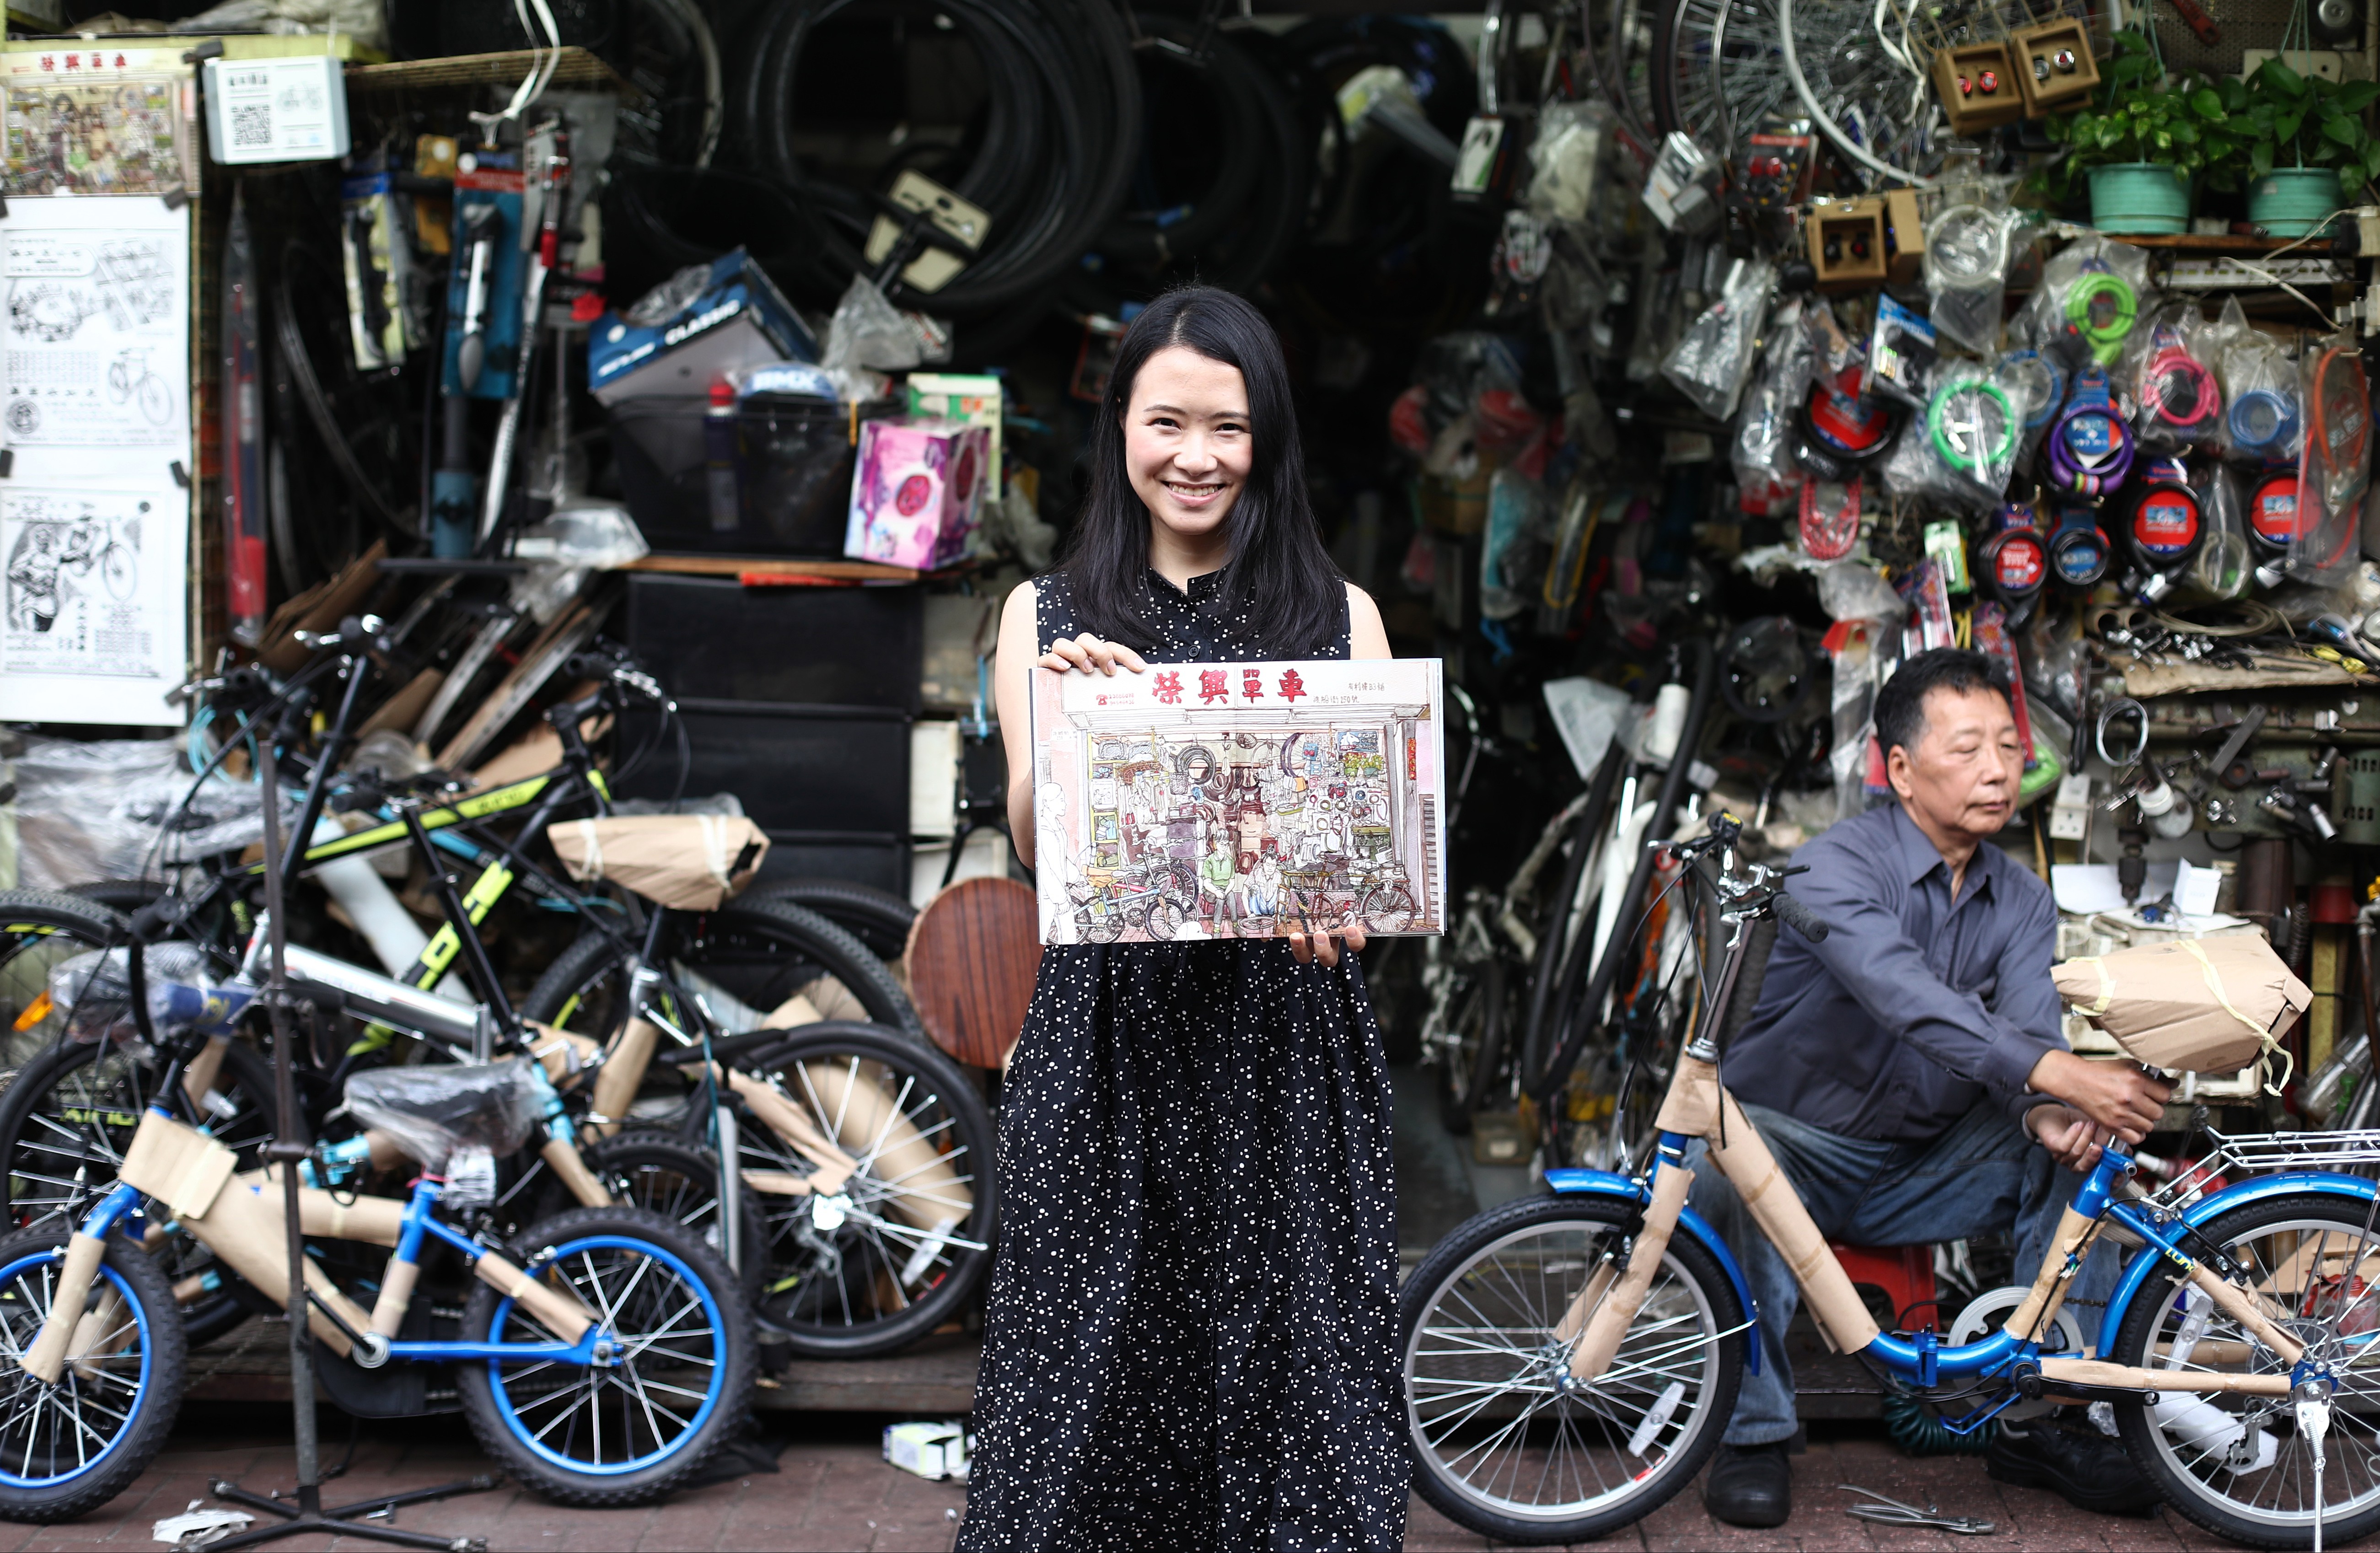 Illustrator Or Wai-wai displays a drawing of Wing Hing Bicycle outside the shop in Yau Ma Tei. Photo: Nora Tam